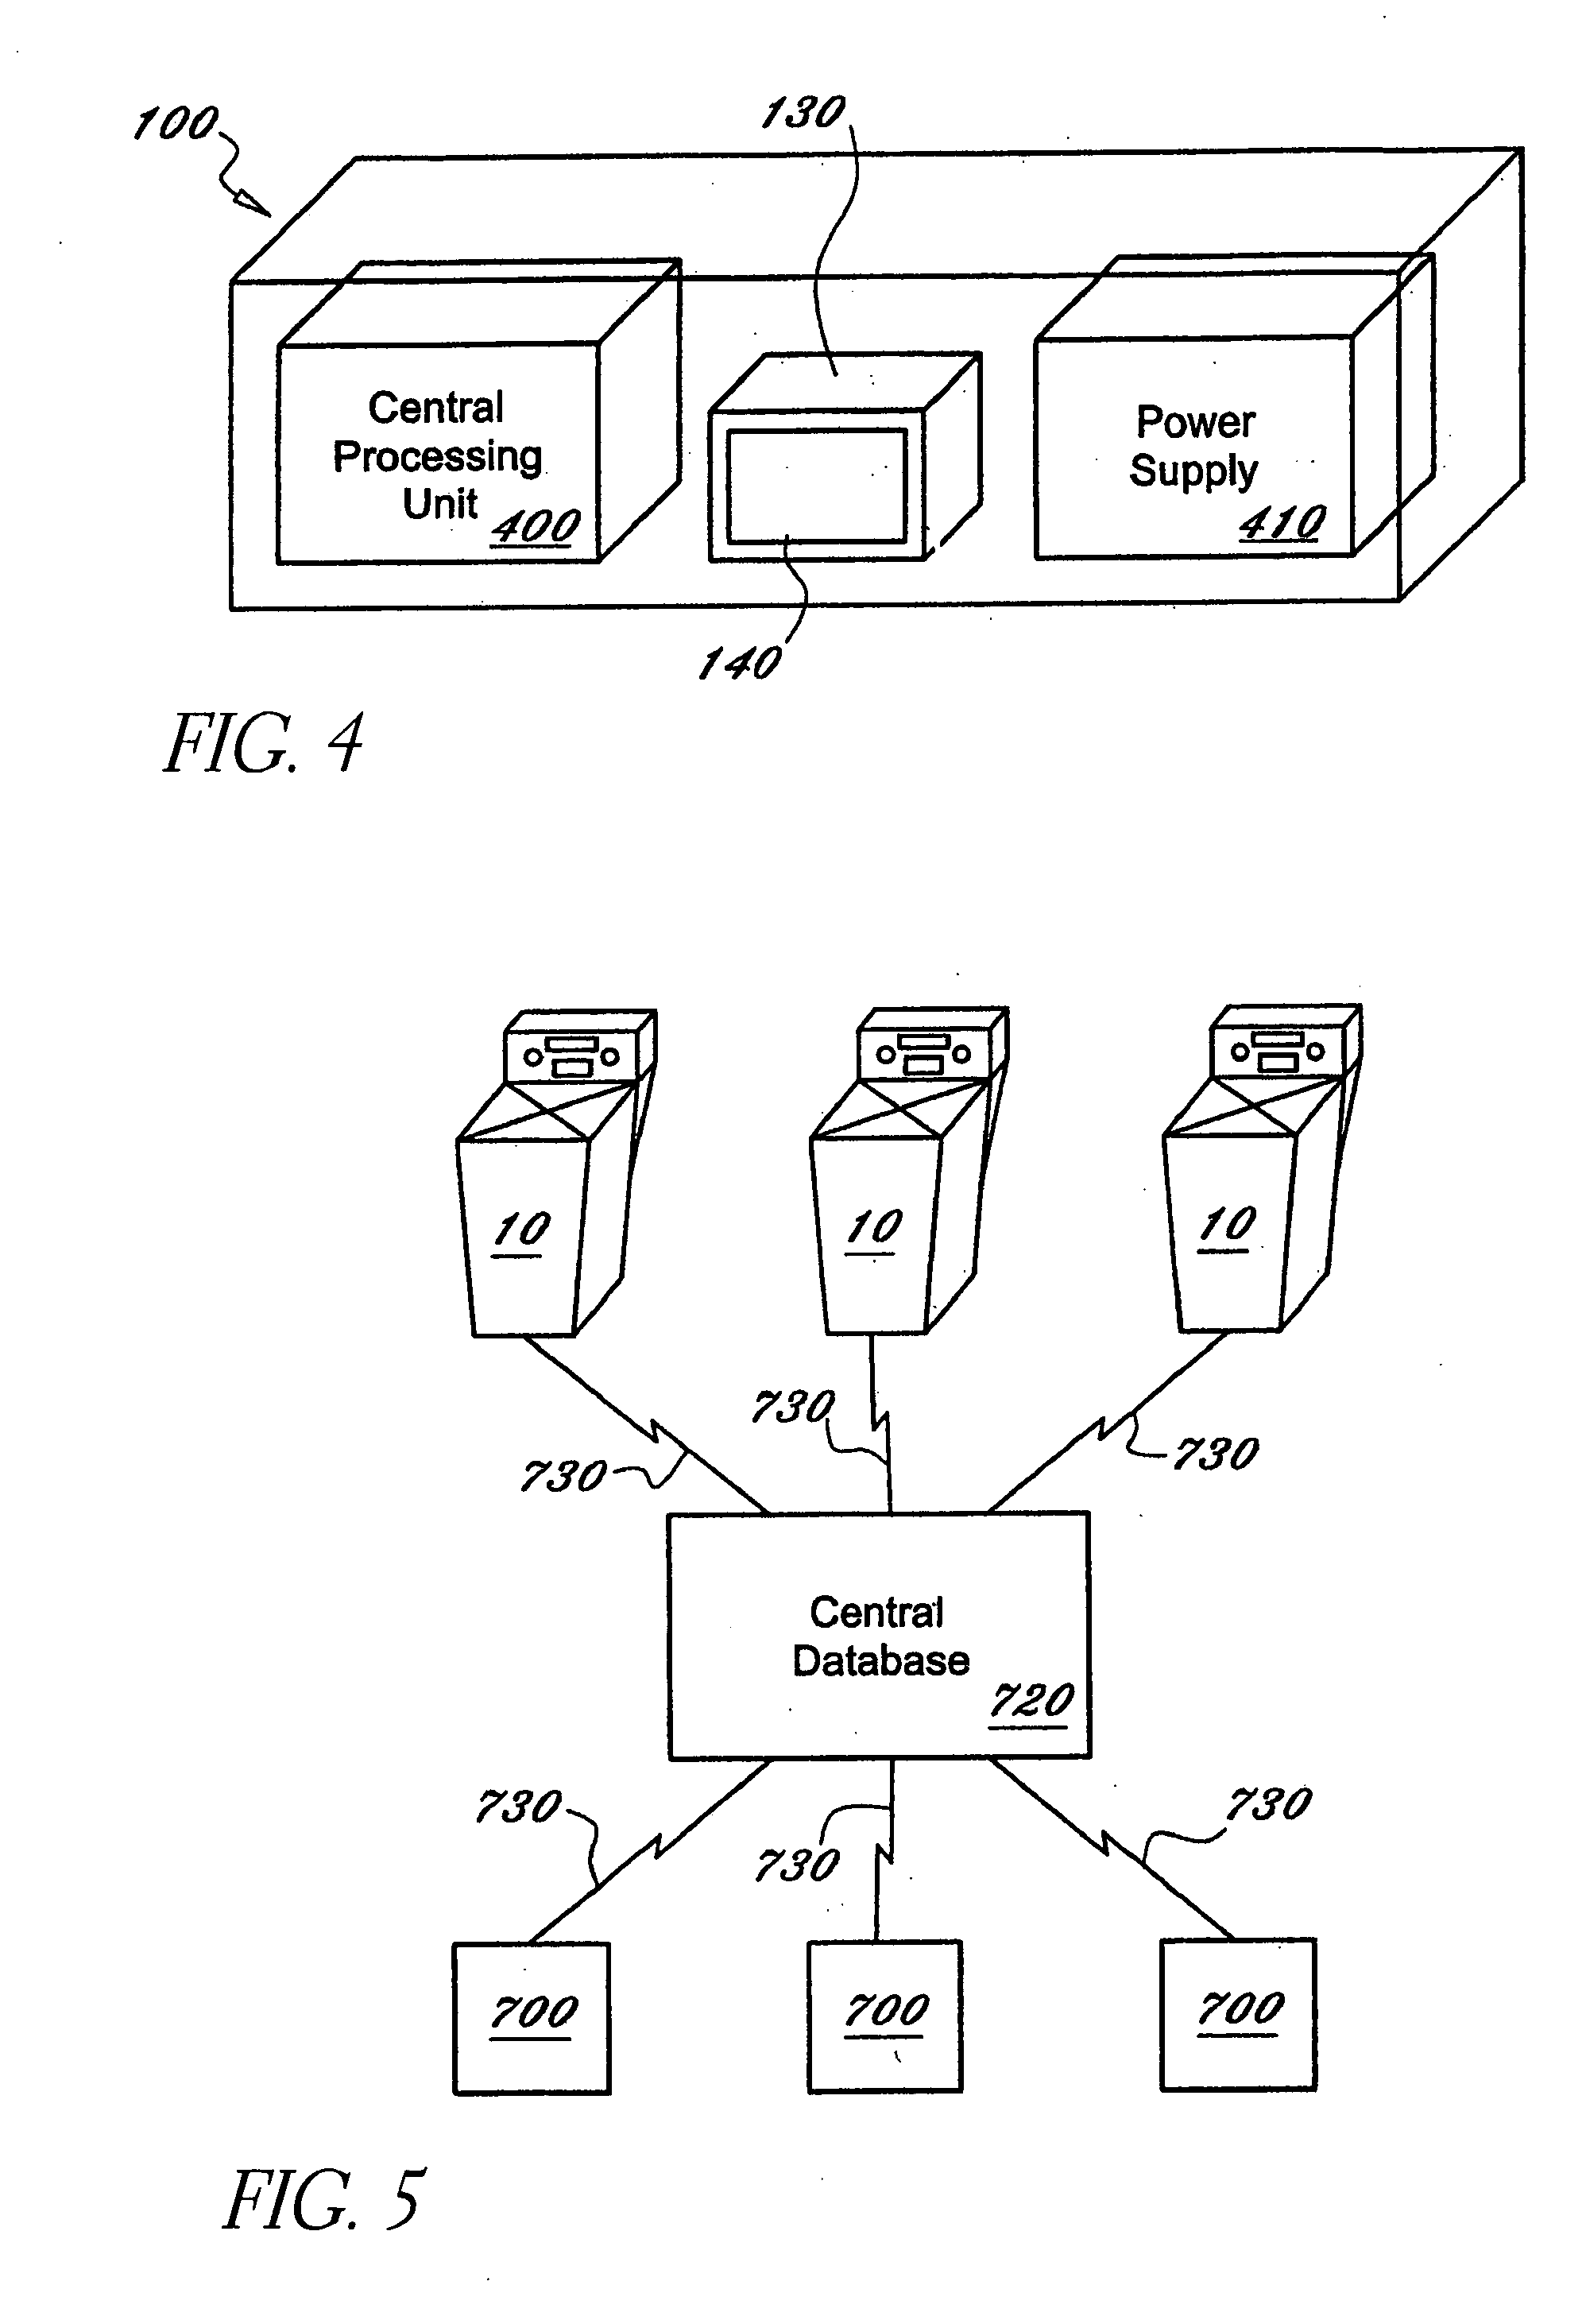 Networked disposal and information distribution apparatus